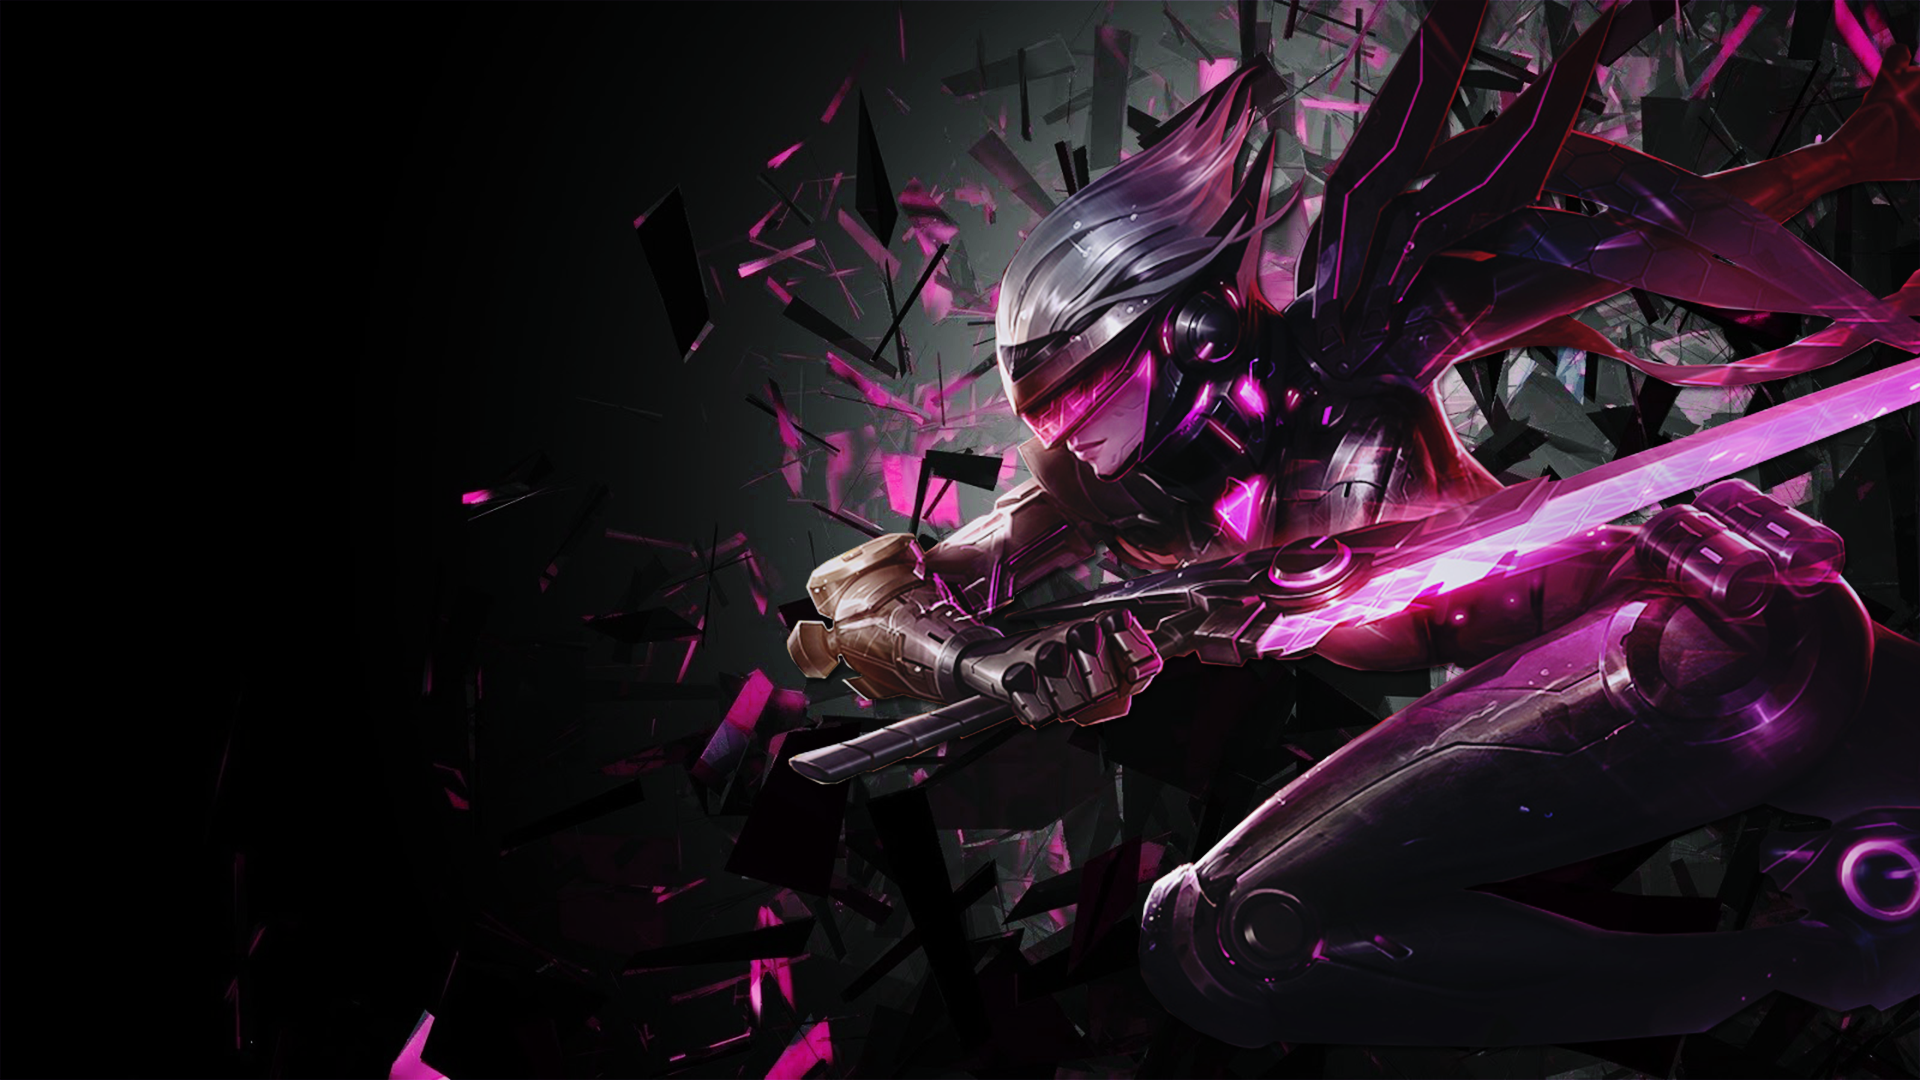 Project Yasuo Fiora Wallpaper Collection 17 Wallpapers HD Wallpapers Download Free Map Images Wallpaper [wallpaper684.blogspot.com]